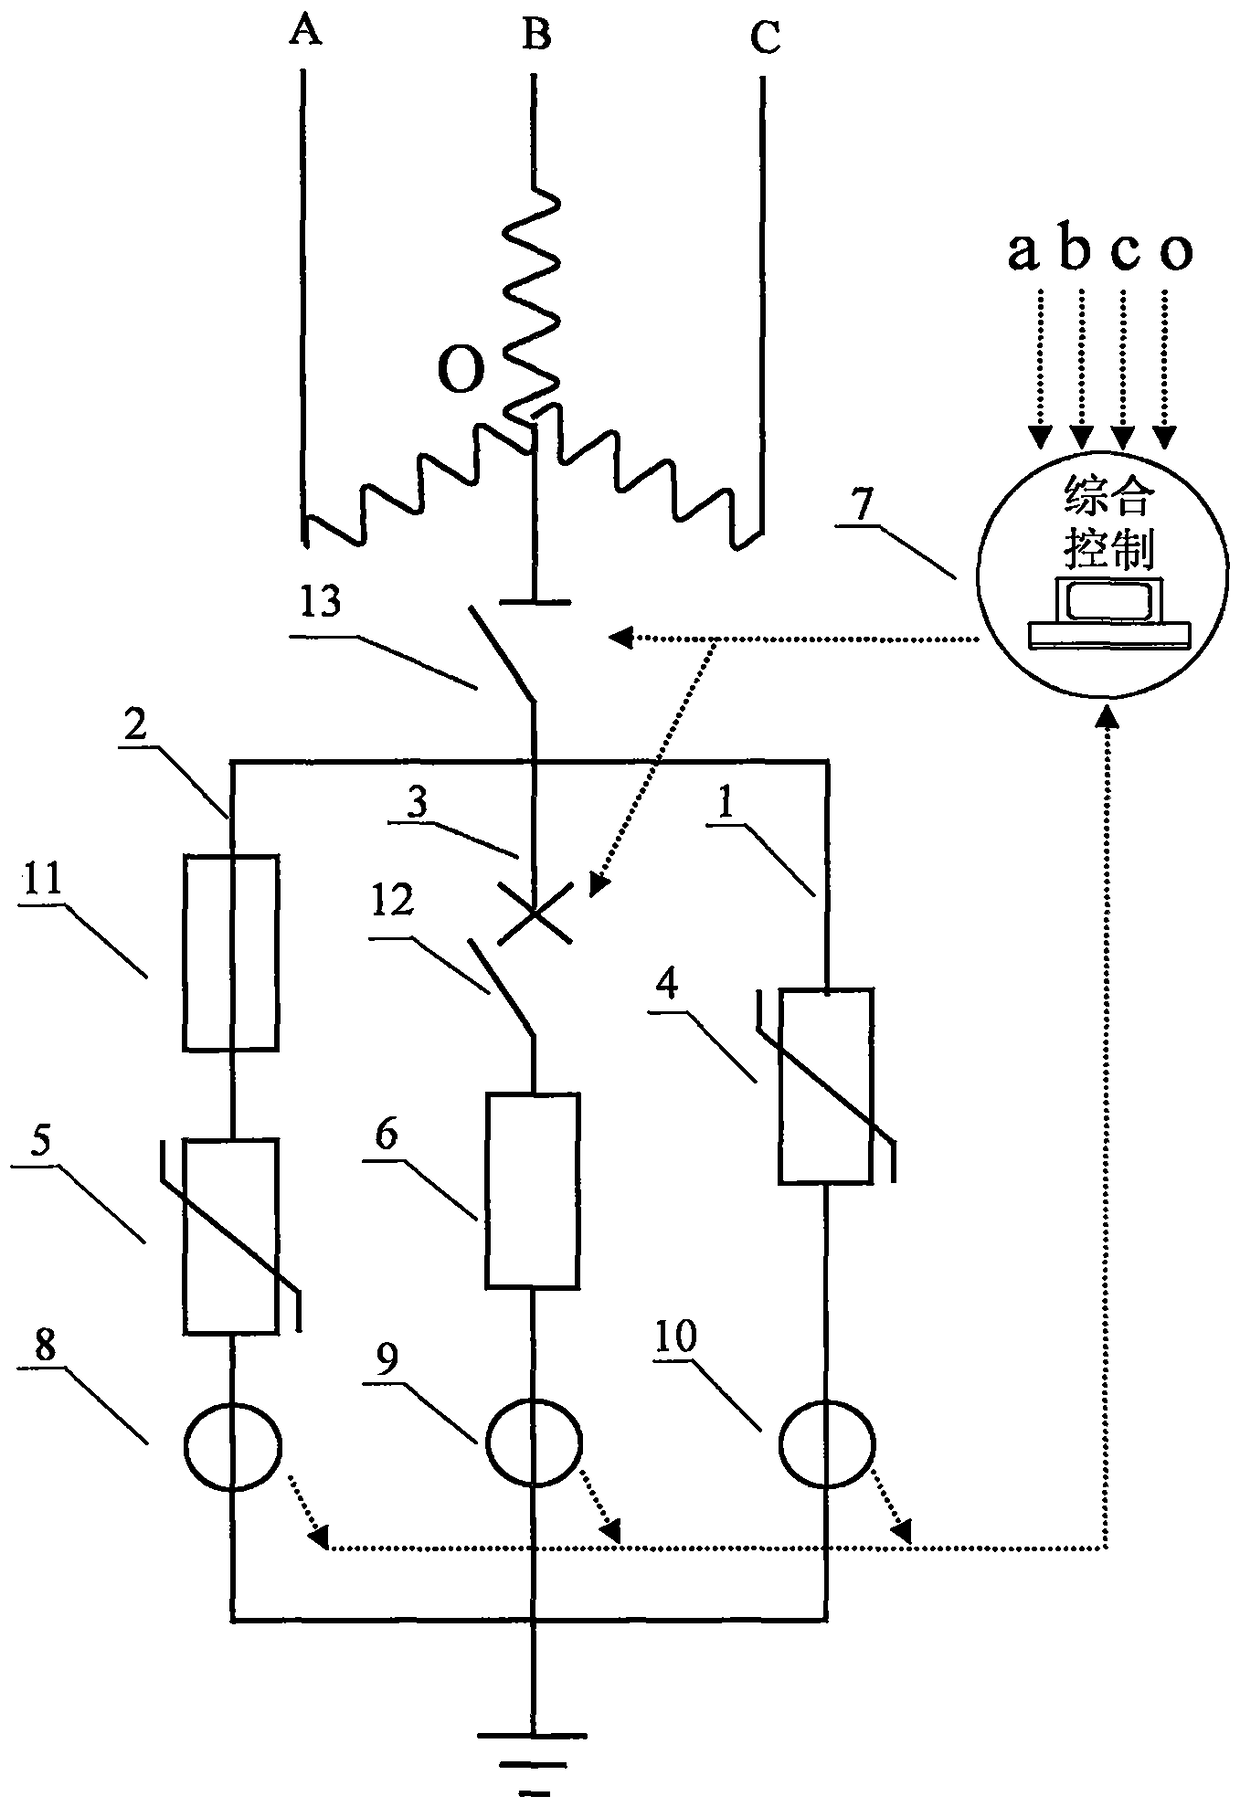 A combined neutral point grounding comprehensive control device